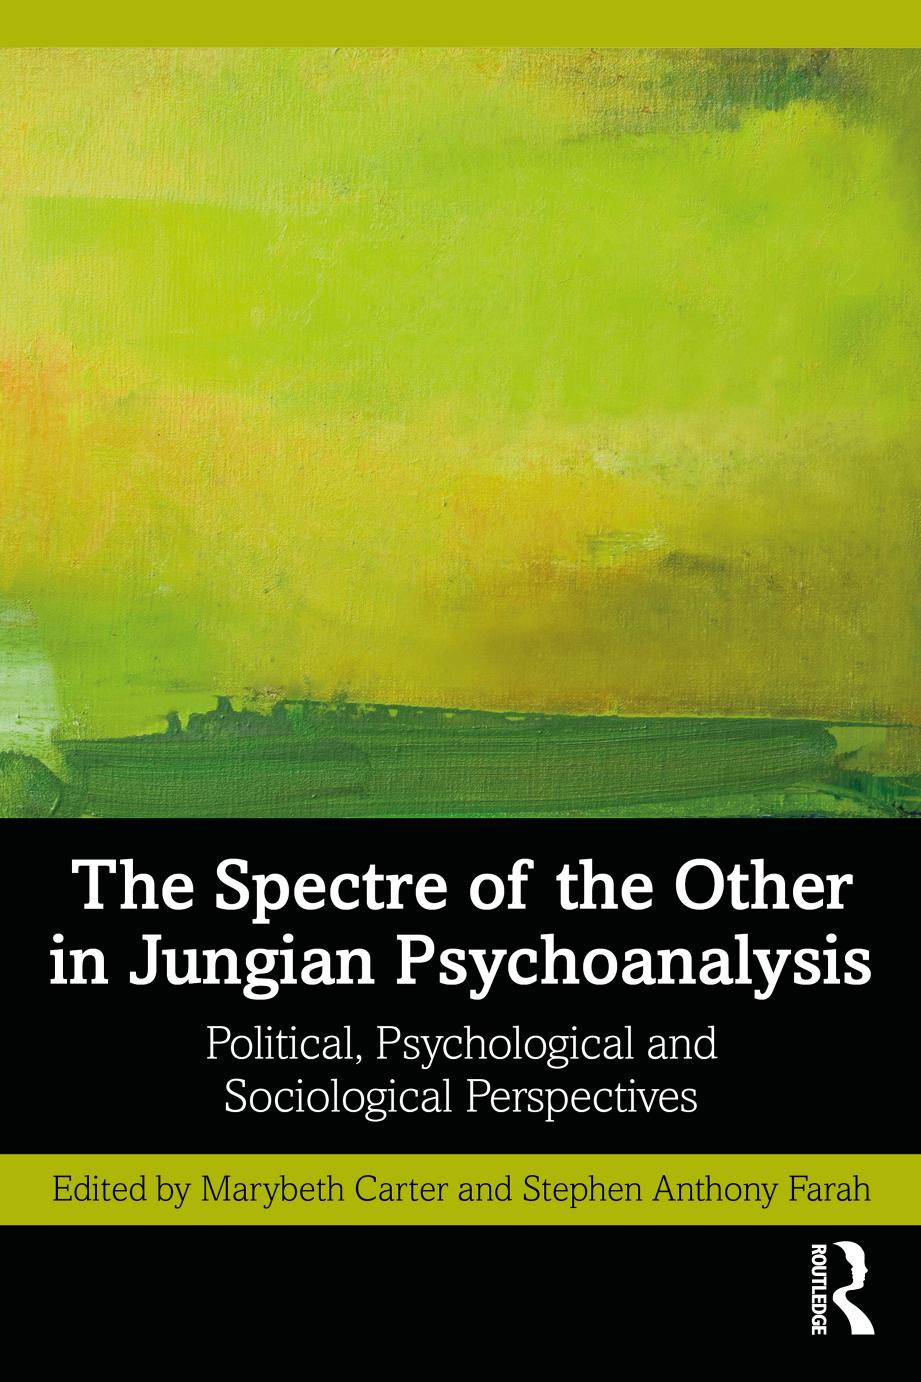 The Spectre of the Other in Jungian Psychoanalysis; Political, Psychological and Sociological Perspectives by Marybeth Carter & Stephen Anthony Farah